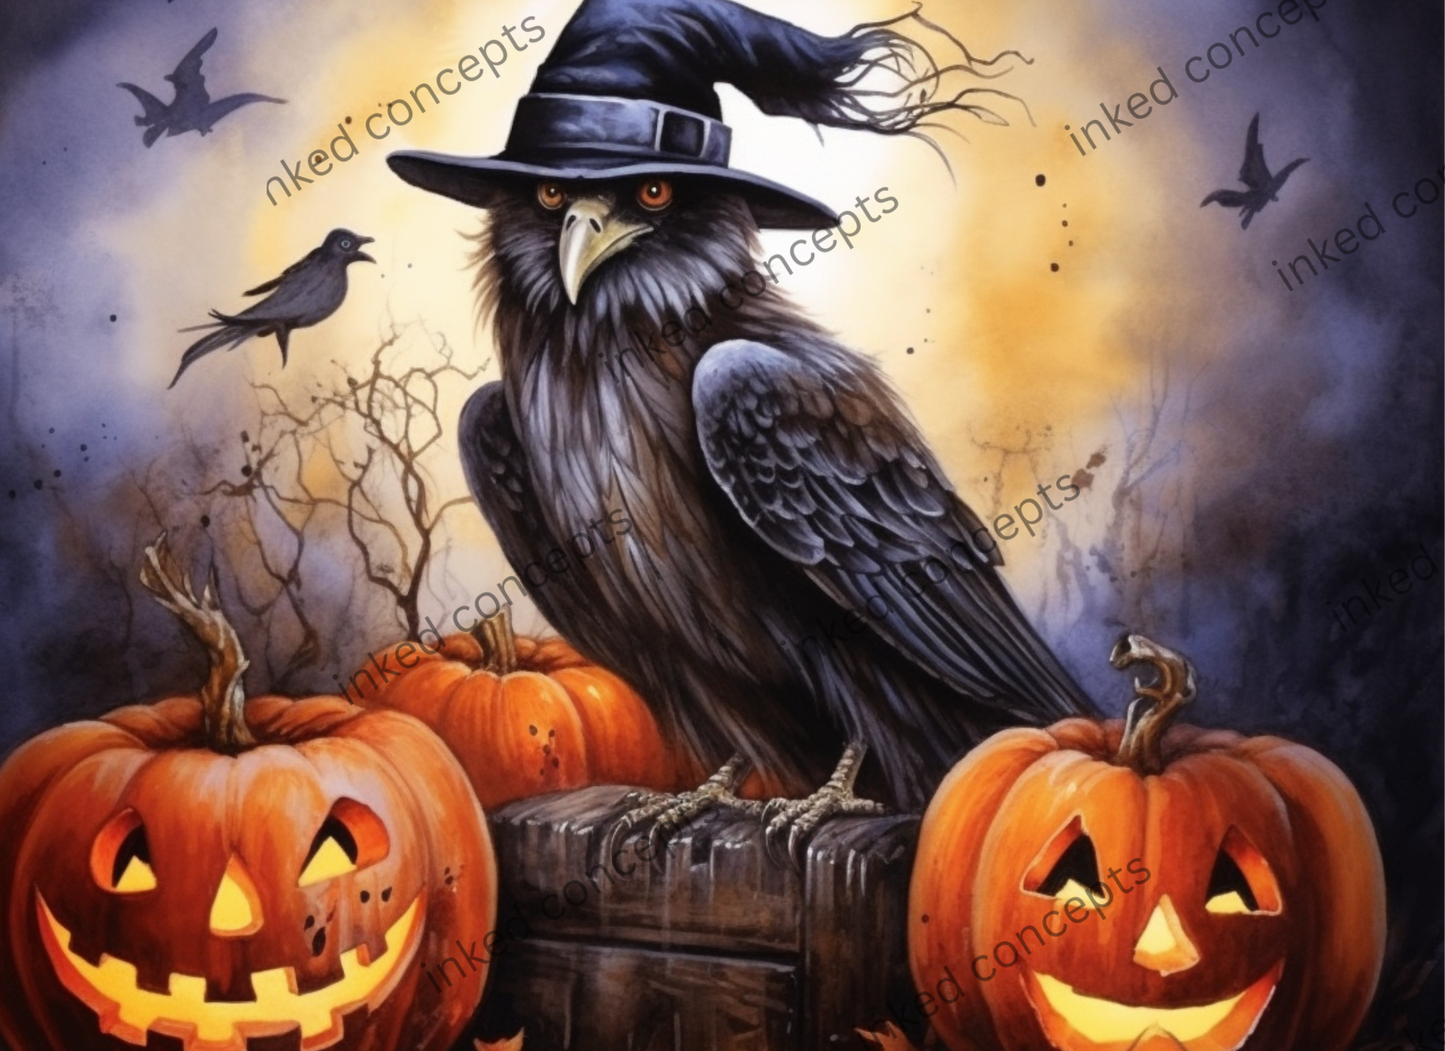 The Witches' Crow